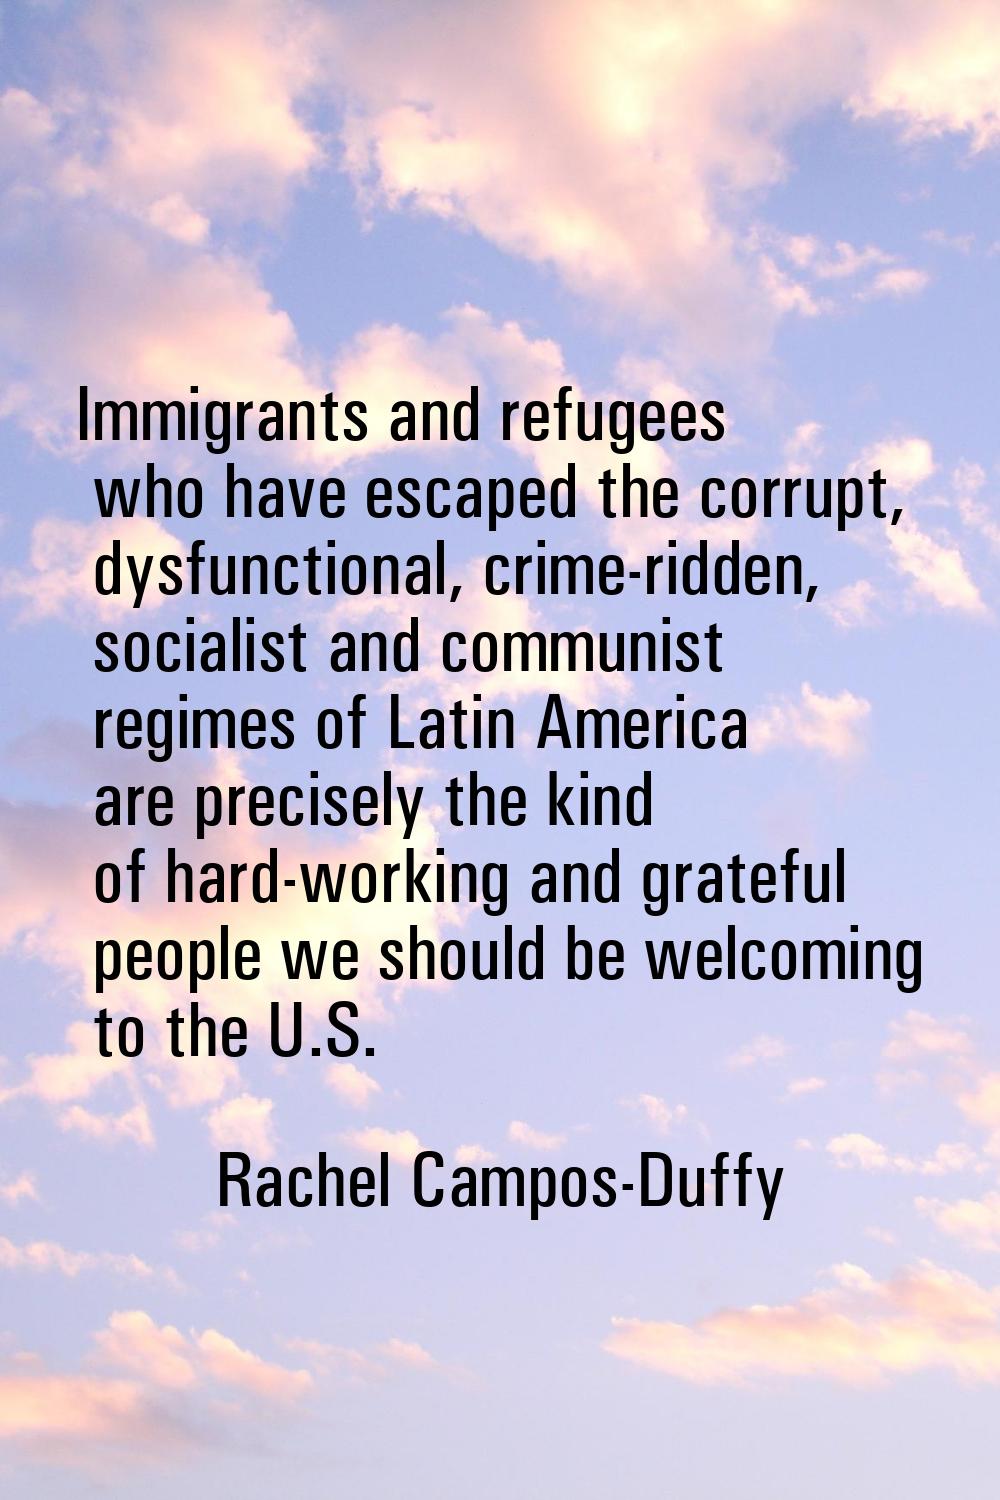 Immigrants and refugees who have escaped the corrupt, dysfunctional, crime-ridden, socialist and co